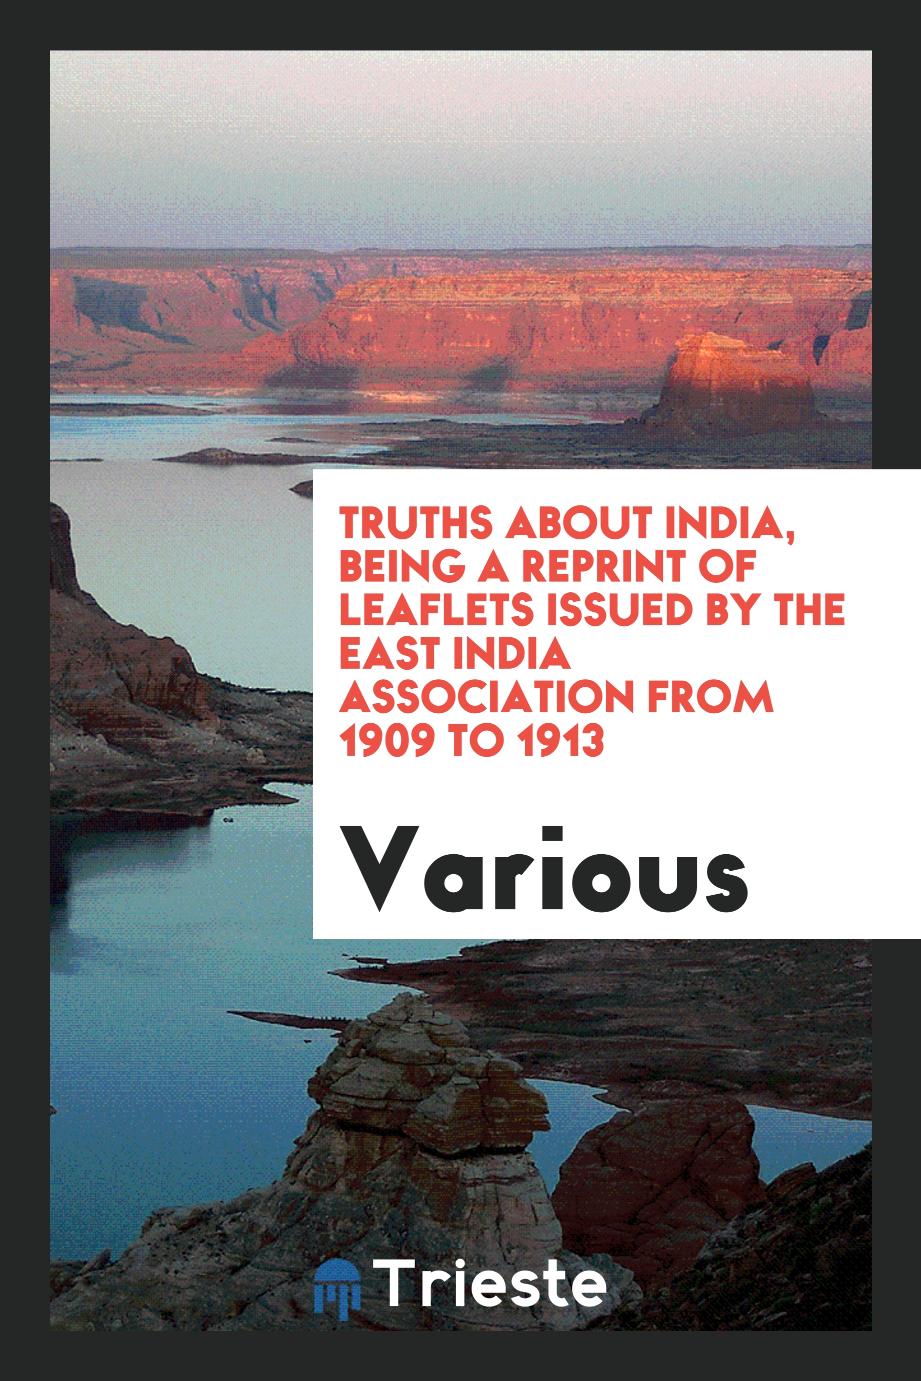 Truths about India, being a reprint of leaflets issued by the East India Association from 1909 to 1913